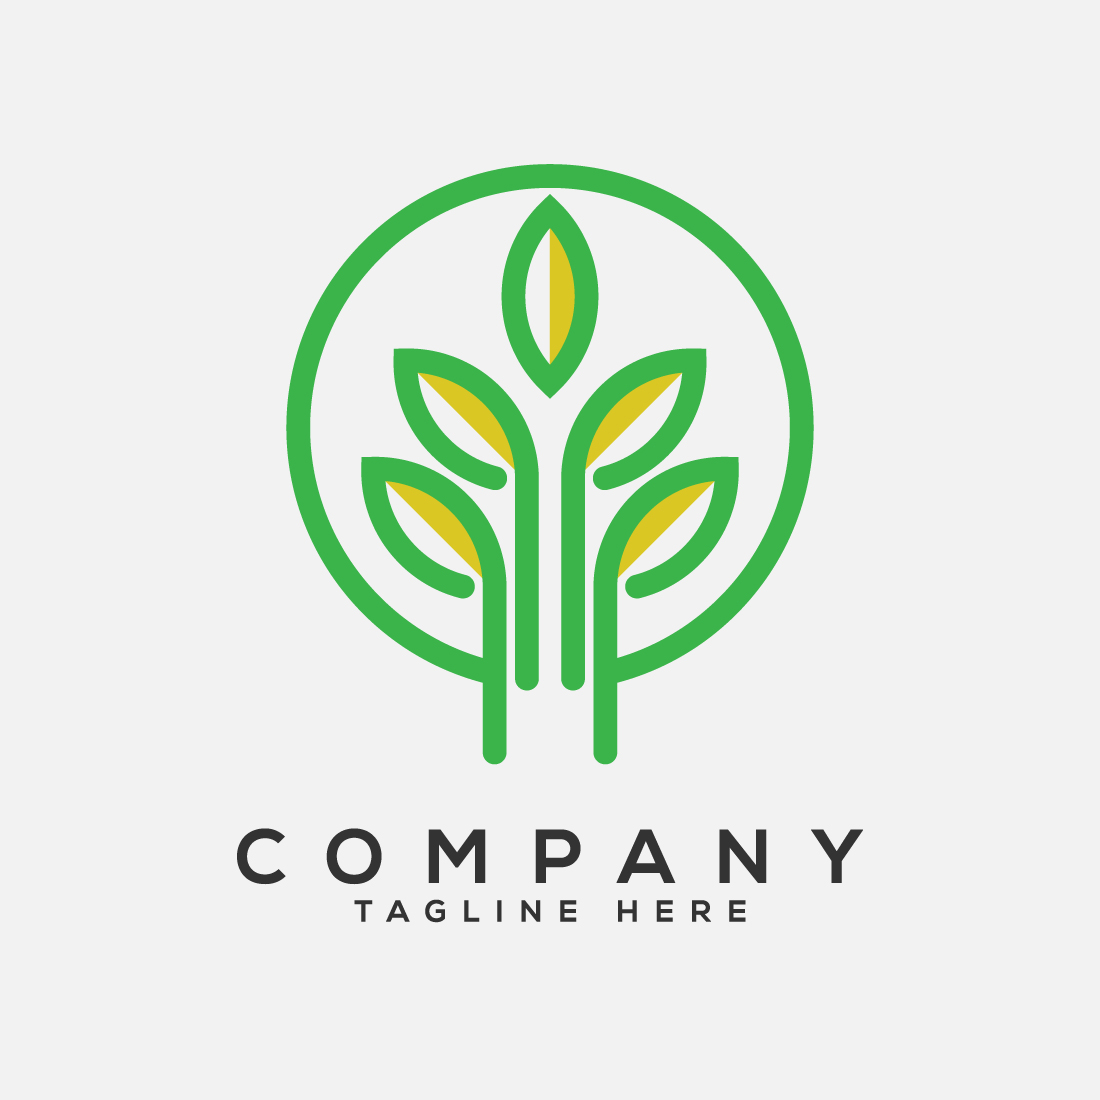 Wheat Ears Icon and Logo For Identity Style of Natural Product Company and Farm Company Agricultural symbols preview image.